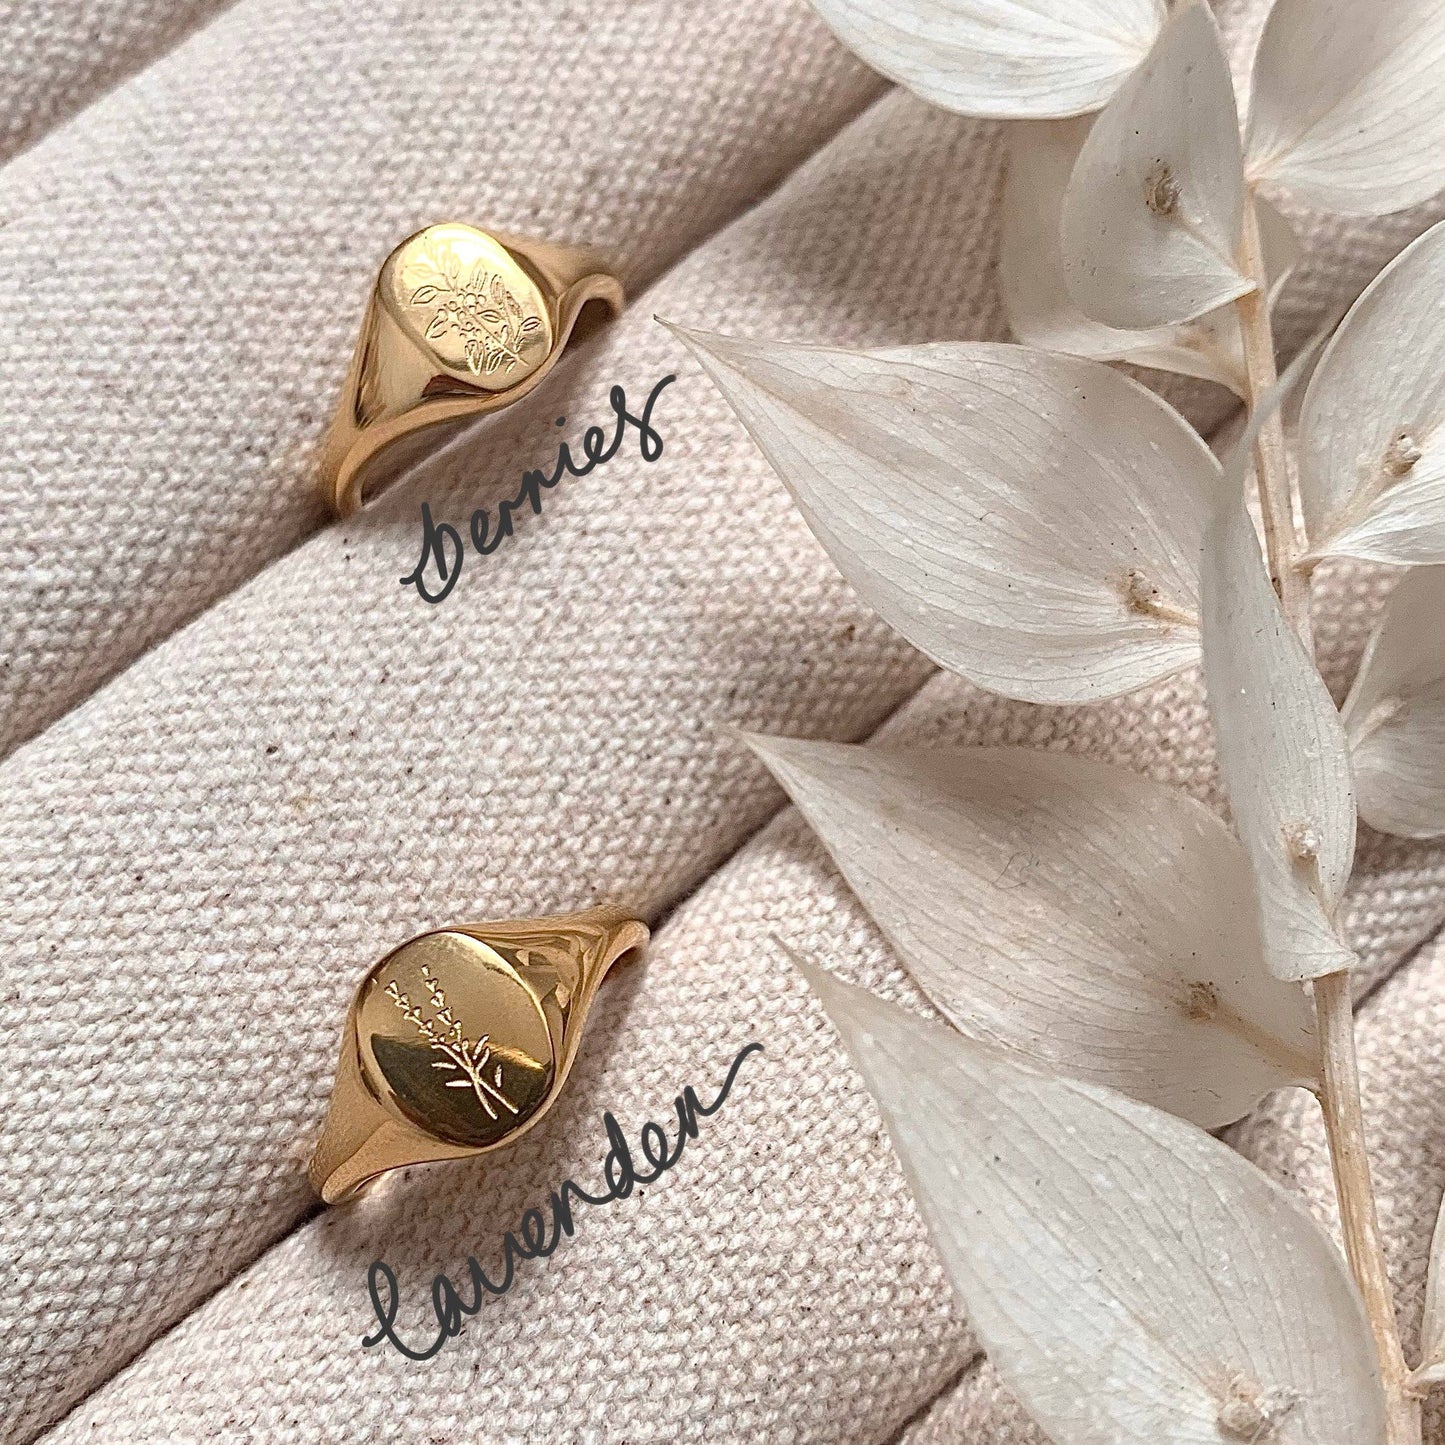 Waterproof 18k Gold Plated Flora Signet Ring